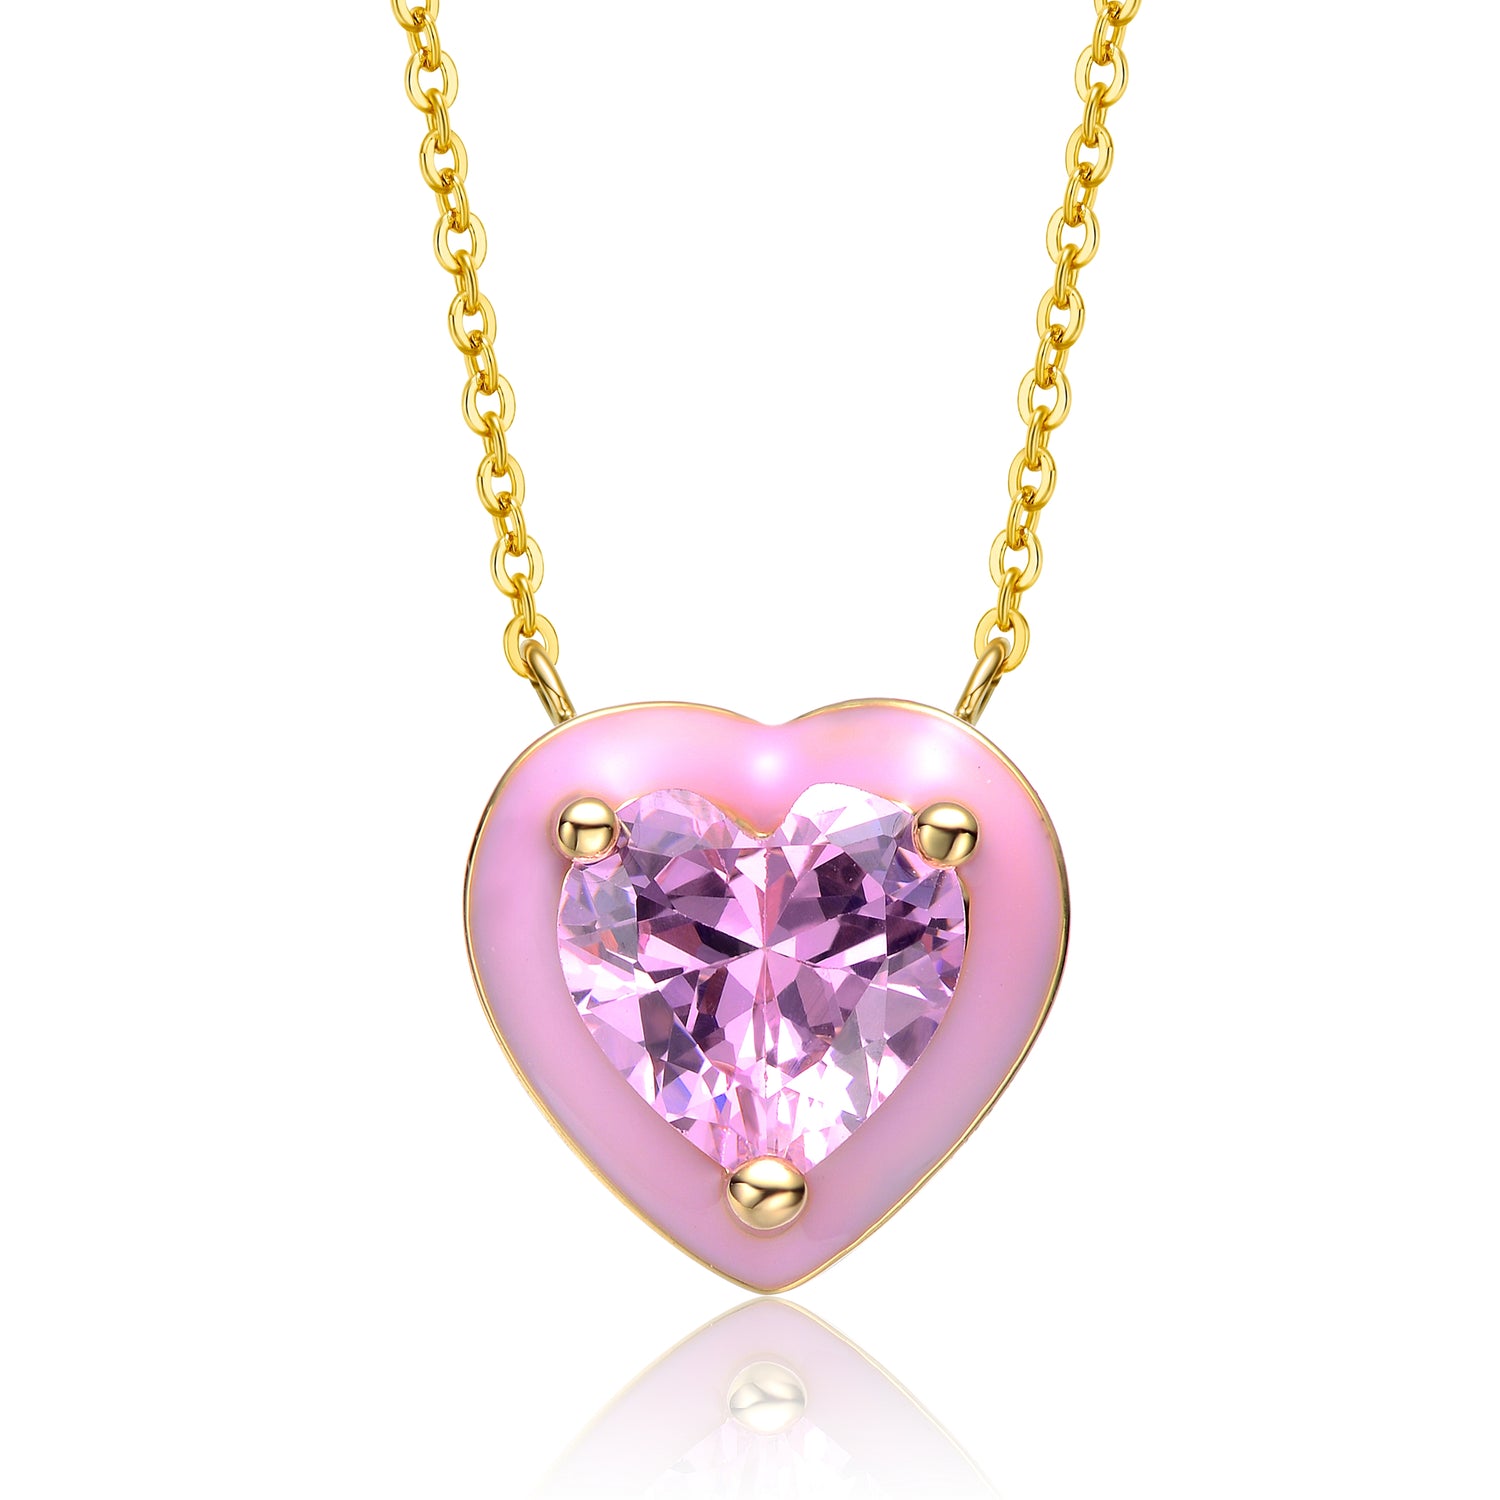 Heart Pendant Necklace -  Inspired by Barbie